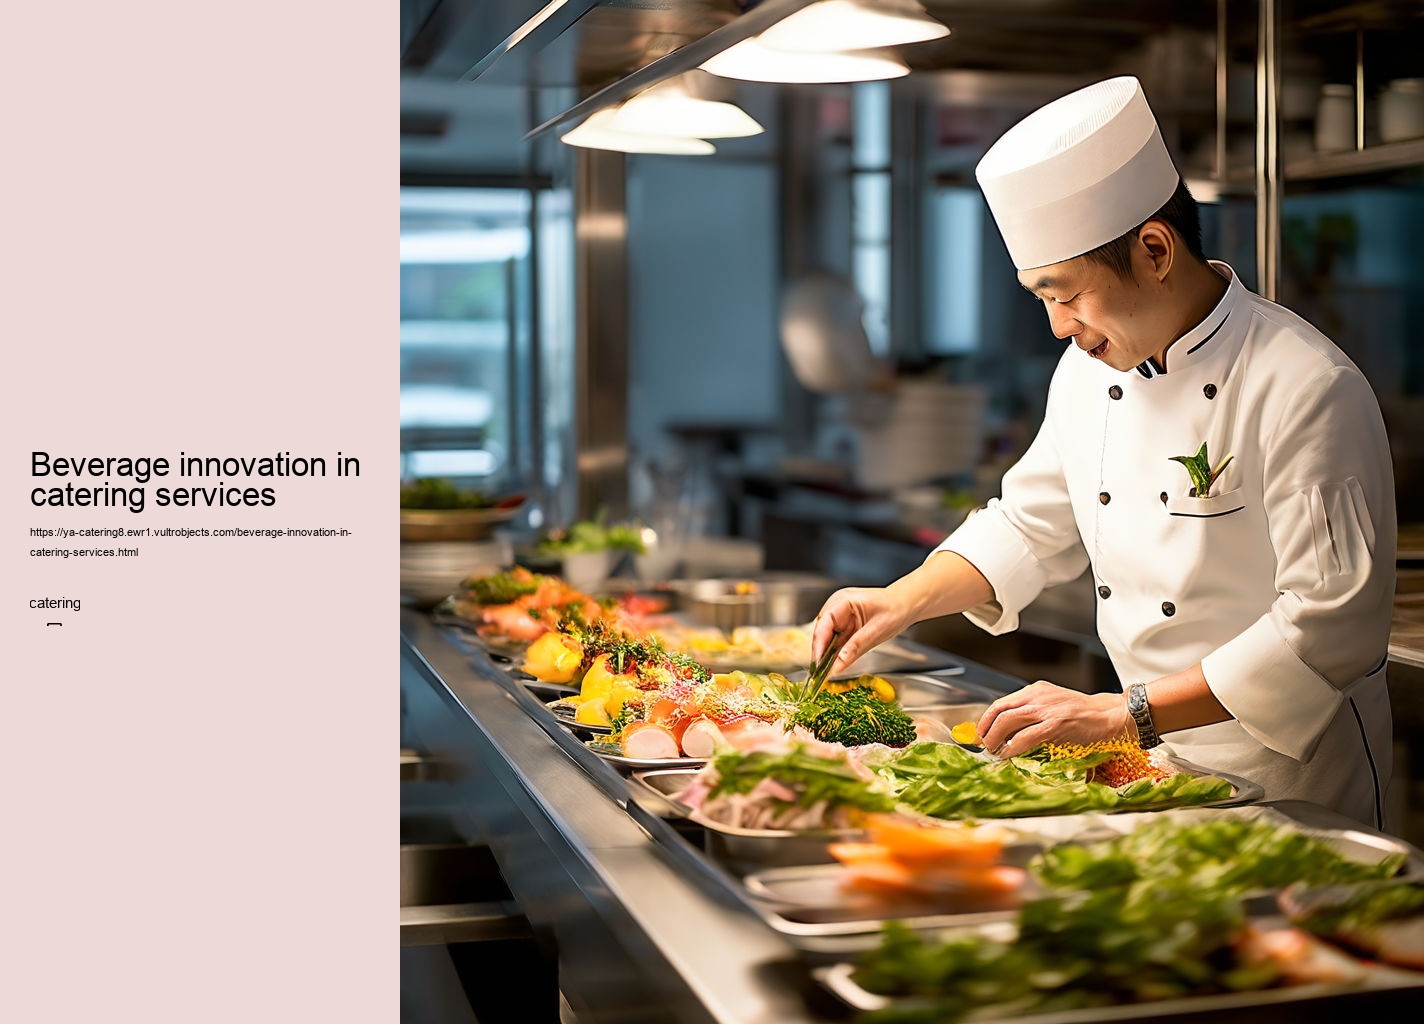 Beverage innovation in catering services